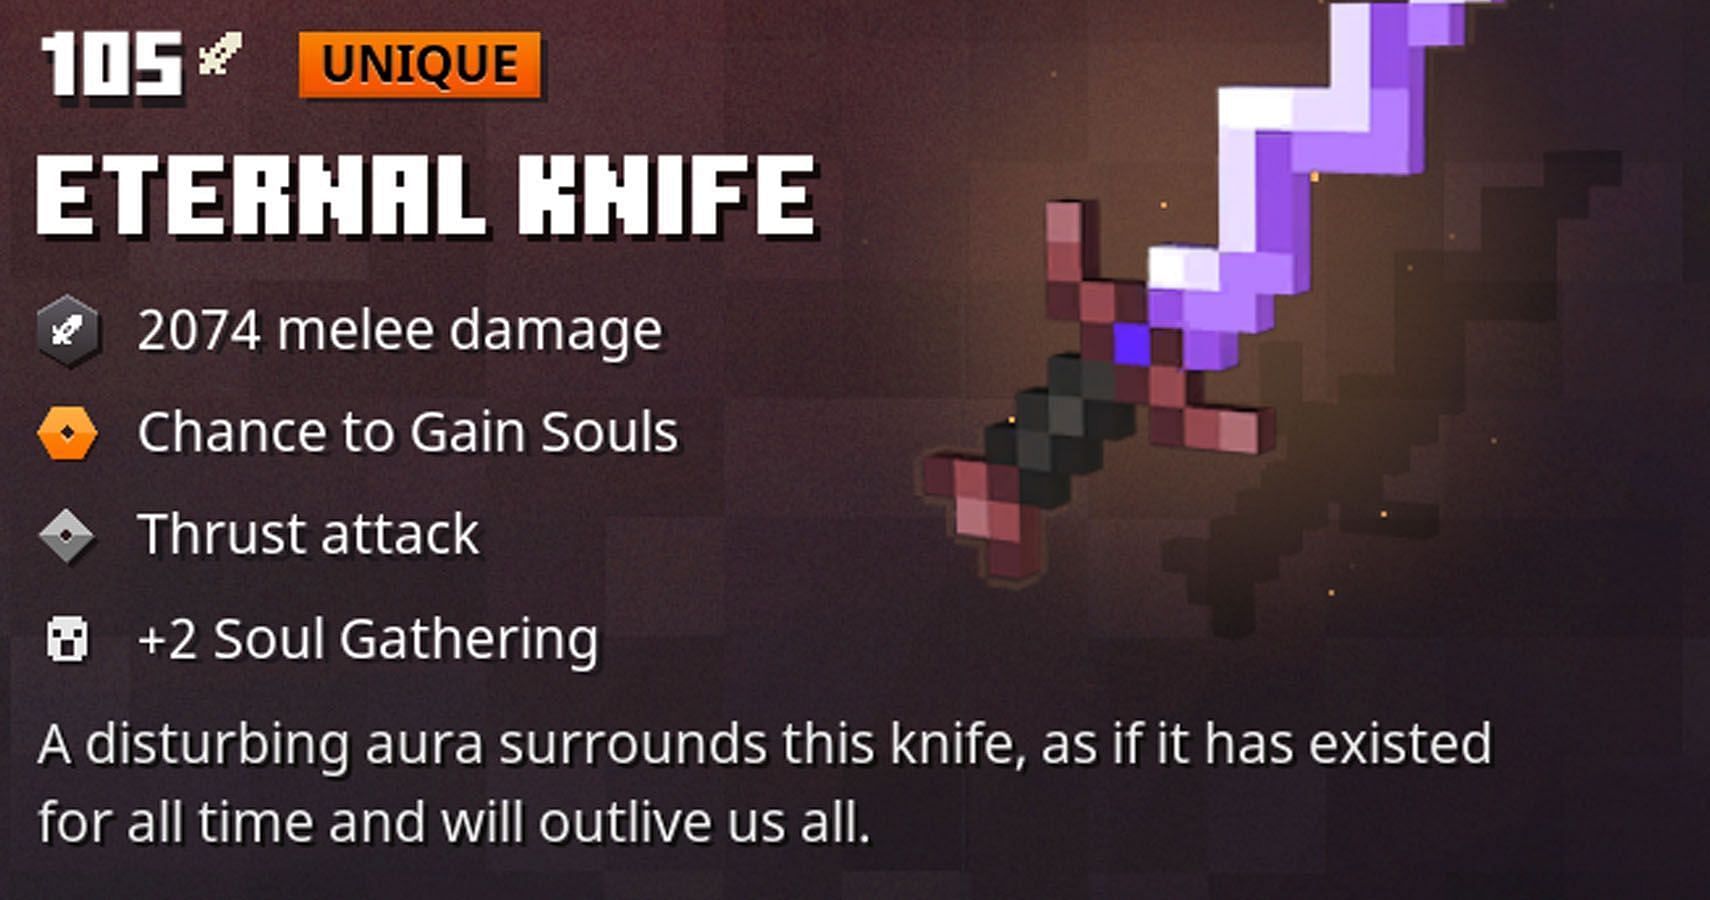 The unique abilities attached to this weapon are excellent (Image via Mojang)